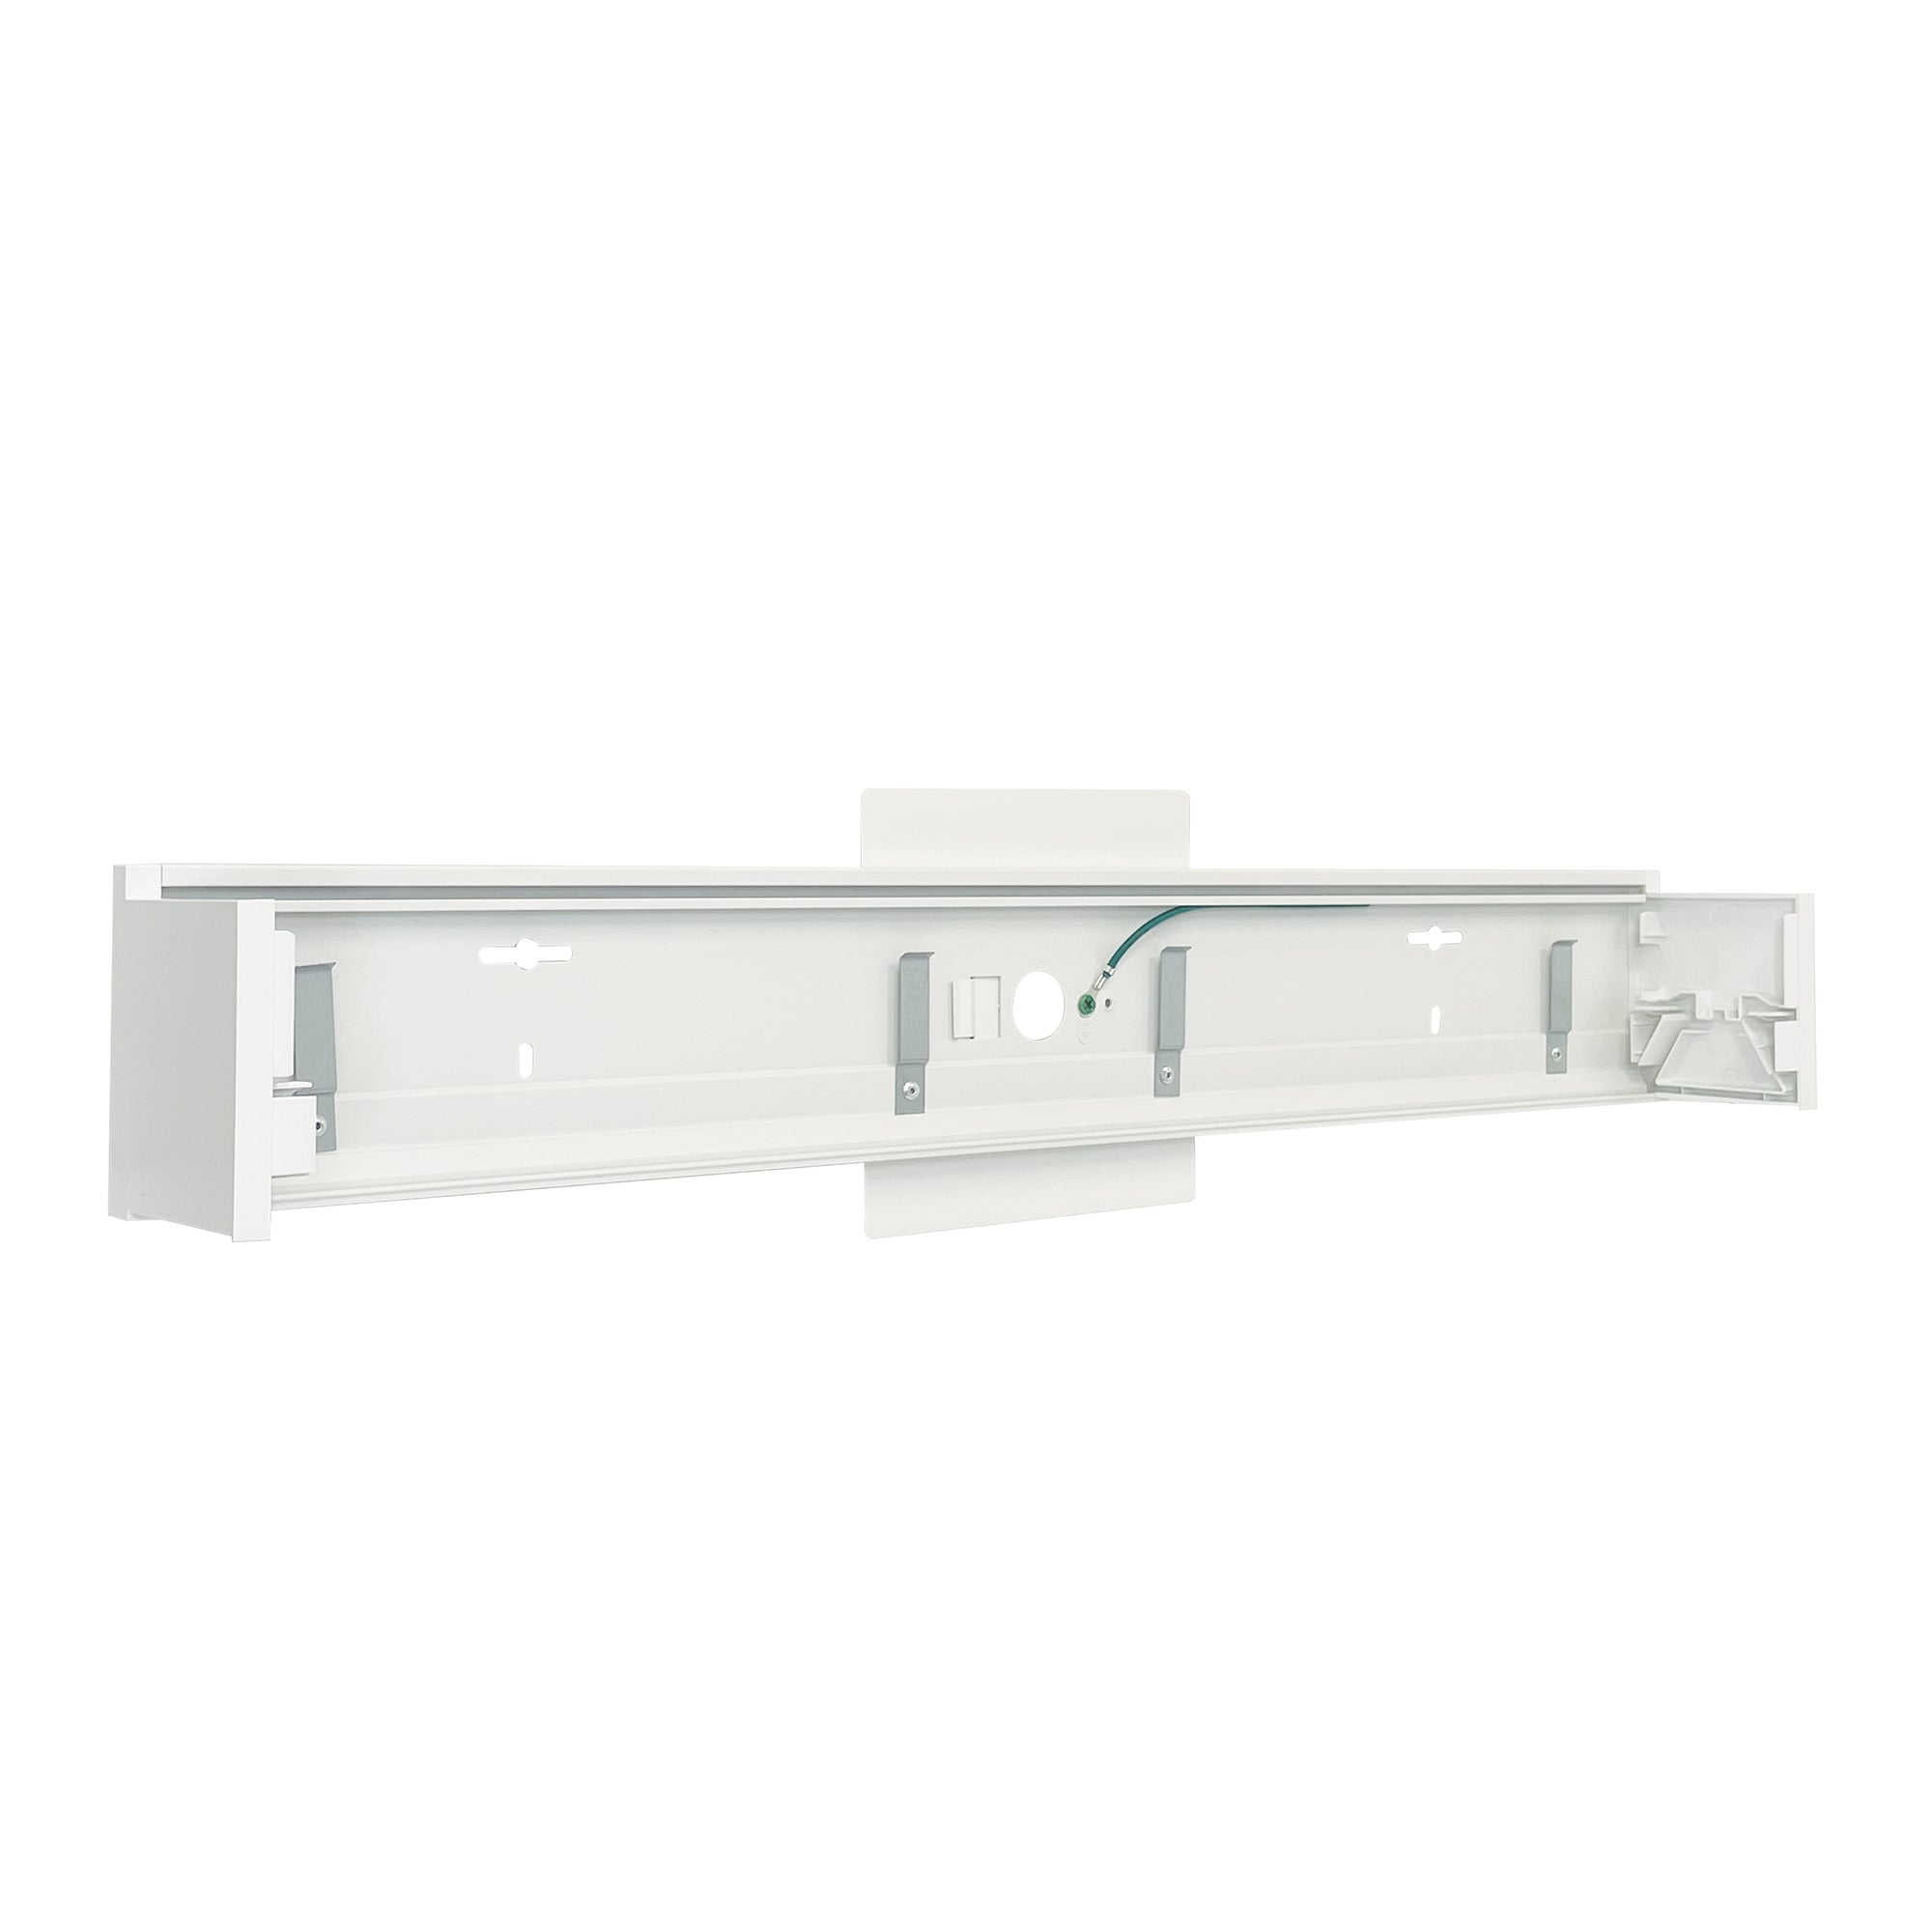 Nora Lighting NLUD-8WMW/6W - Linear - Wall Mount Kit for NLUD-8334, White Finish, wired for EM